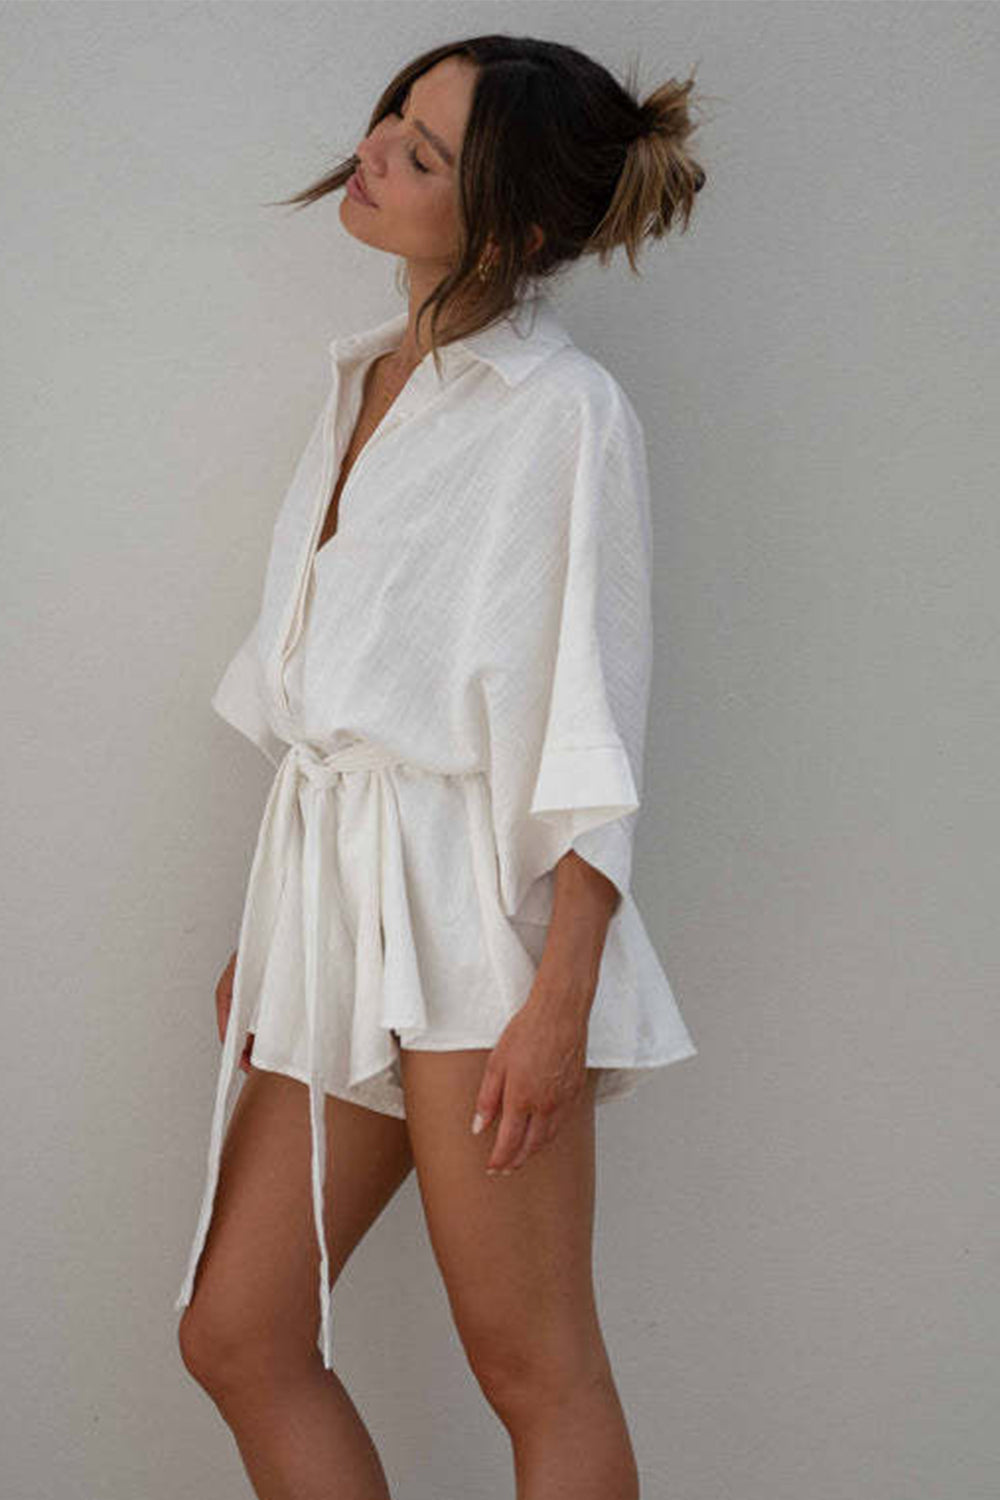 Tied Button Up Collared Neck Romper